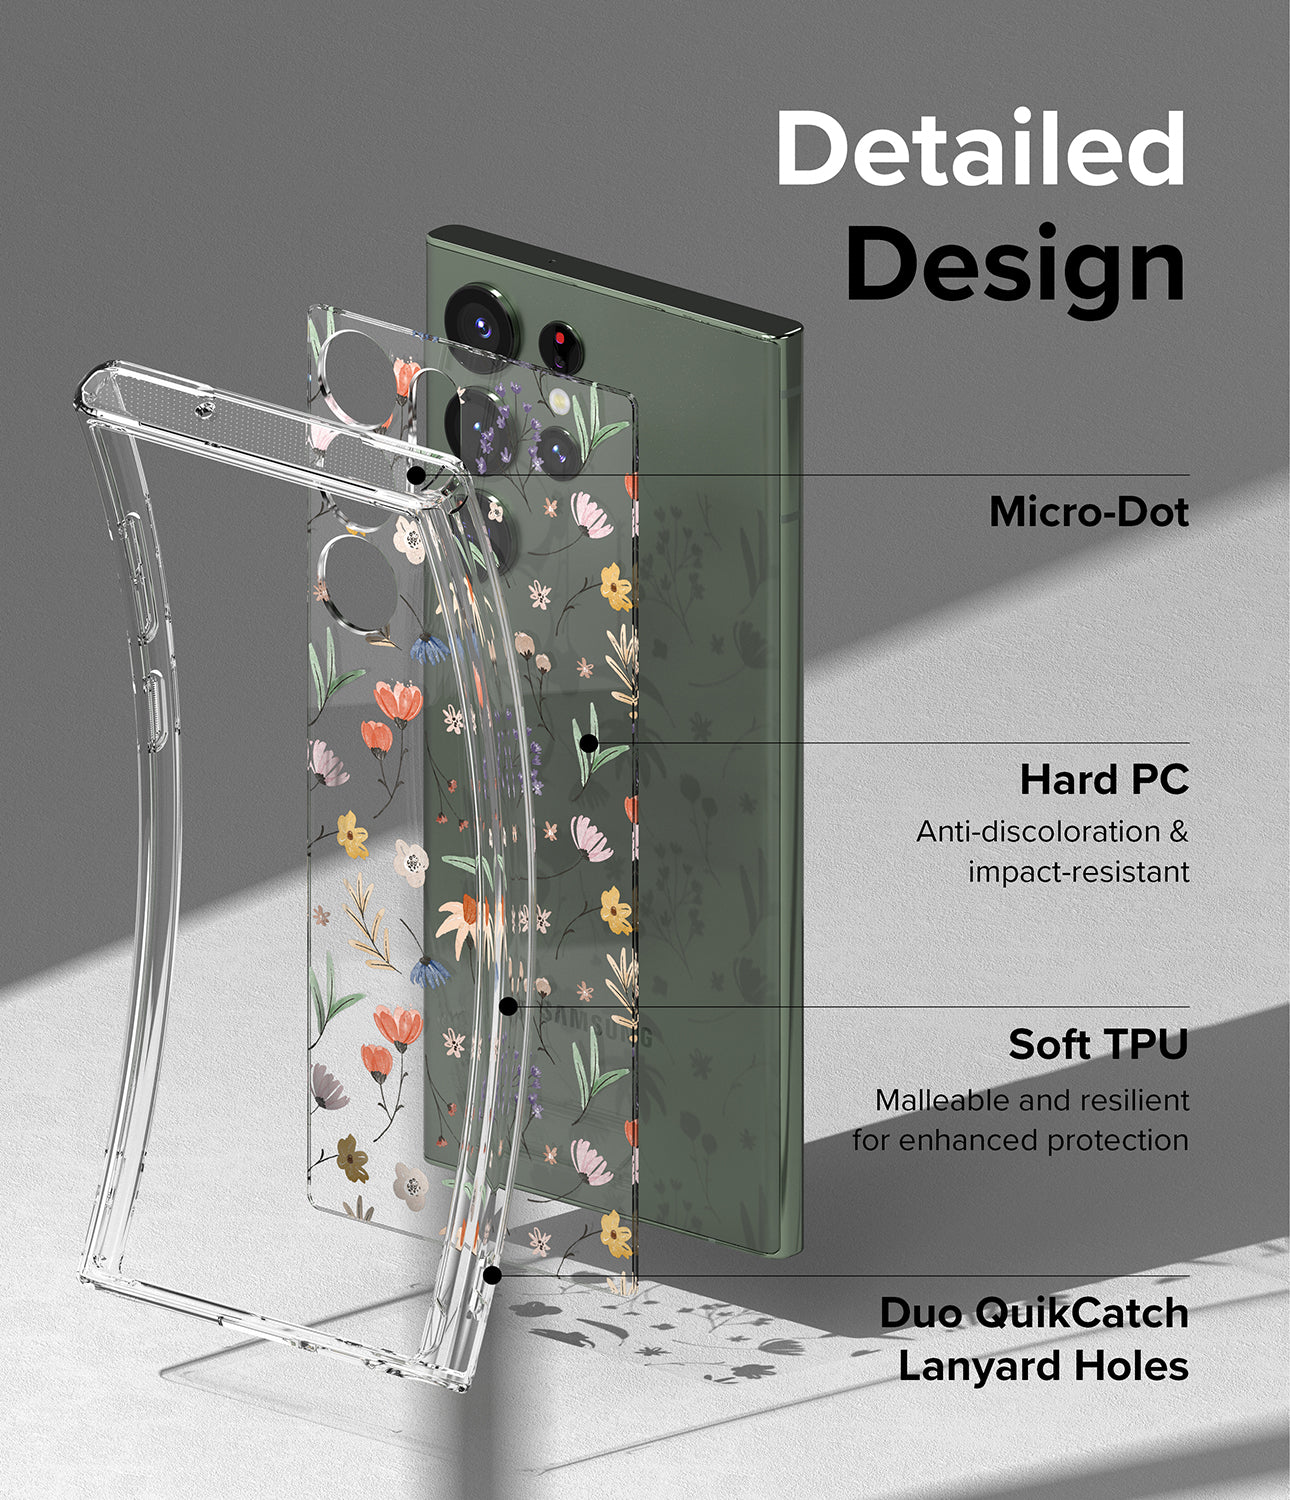 Galaxy S23 Ultra Case | Fusion Design Dry Flowers - Detailed Design. Micro-Dot . Anti-discoloration and impact-resistant with Hard PC. Malleable and resilient for enhanced protection with Soft TPU. Duo QuikCatch Lanyard Holes.